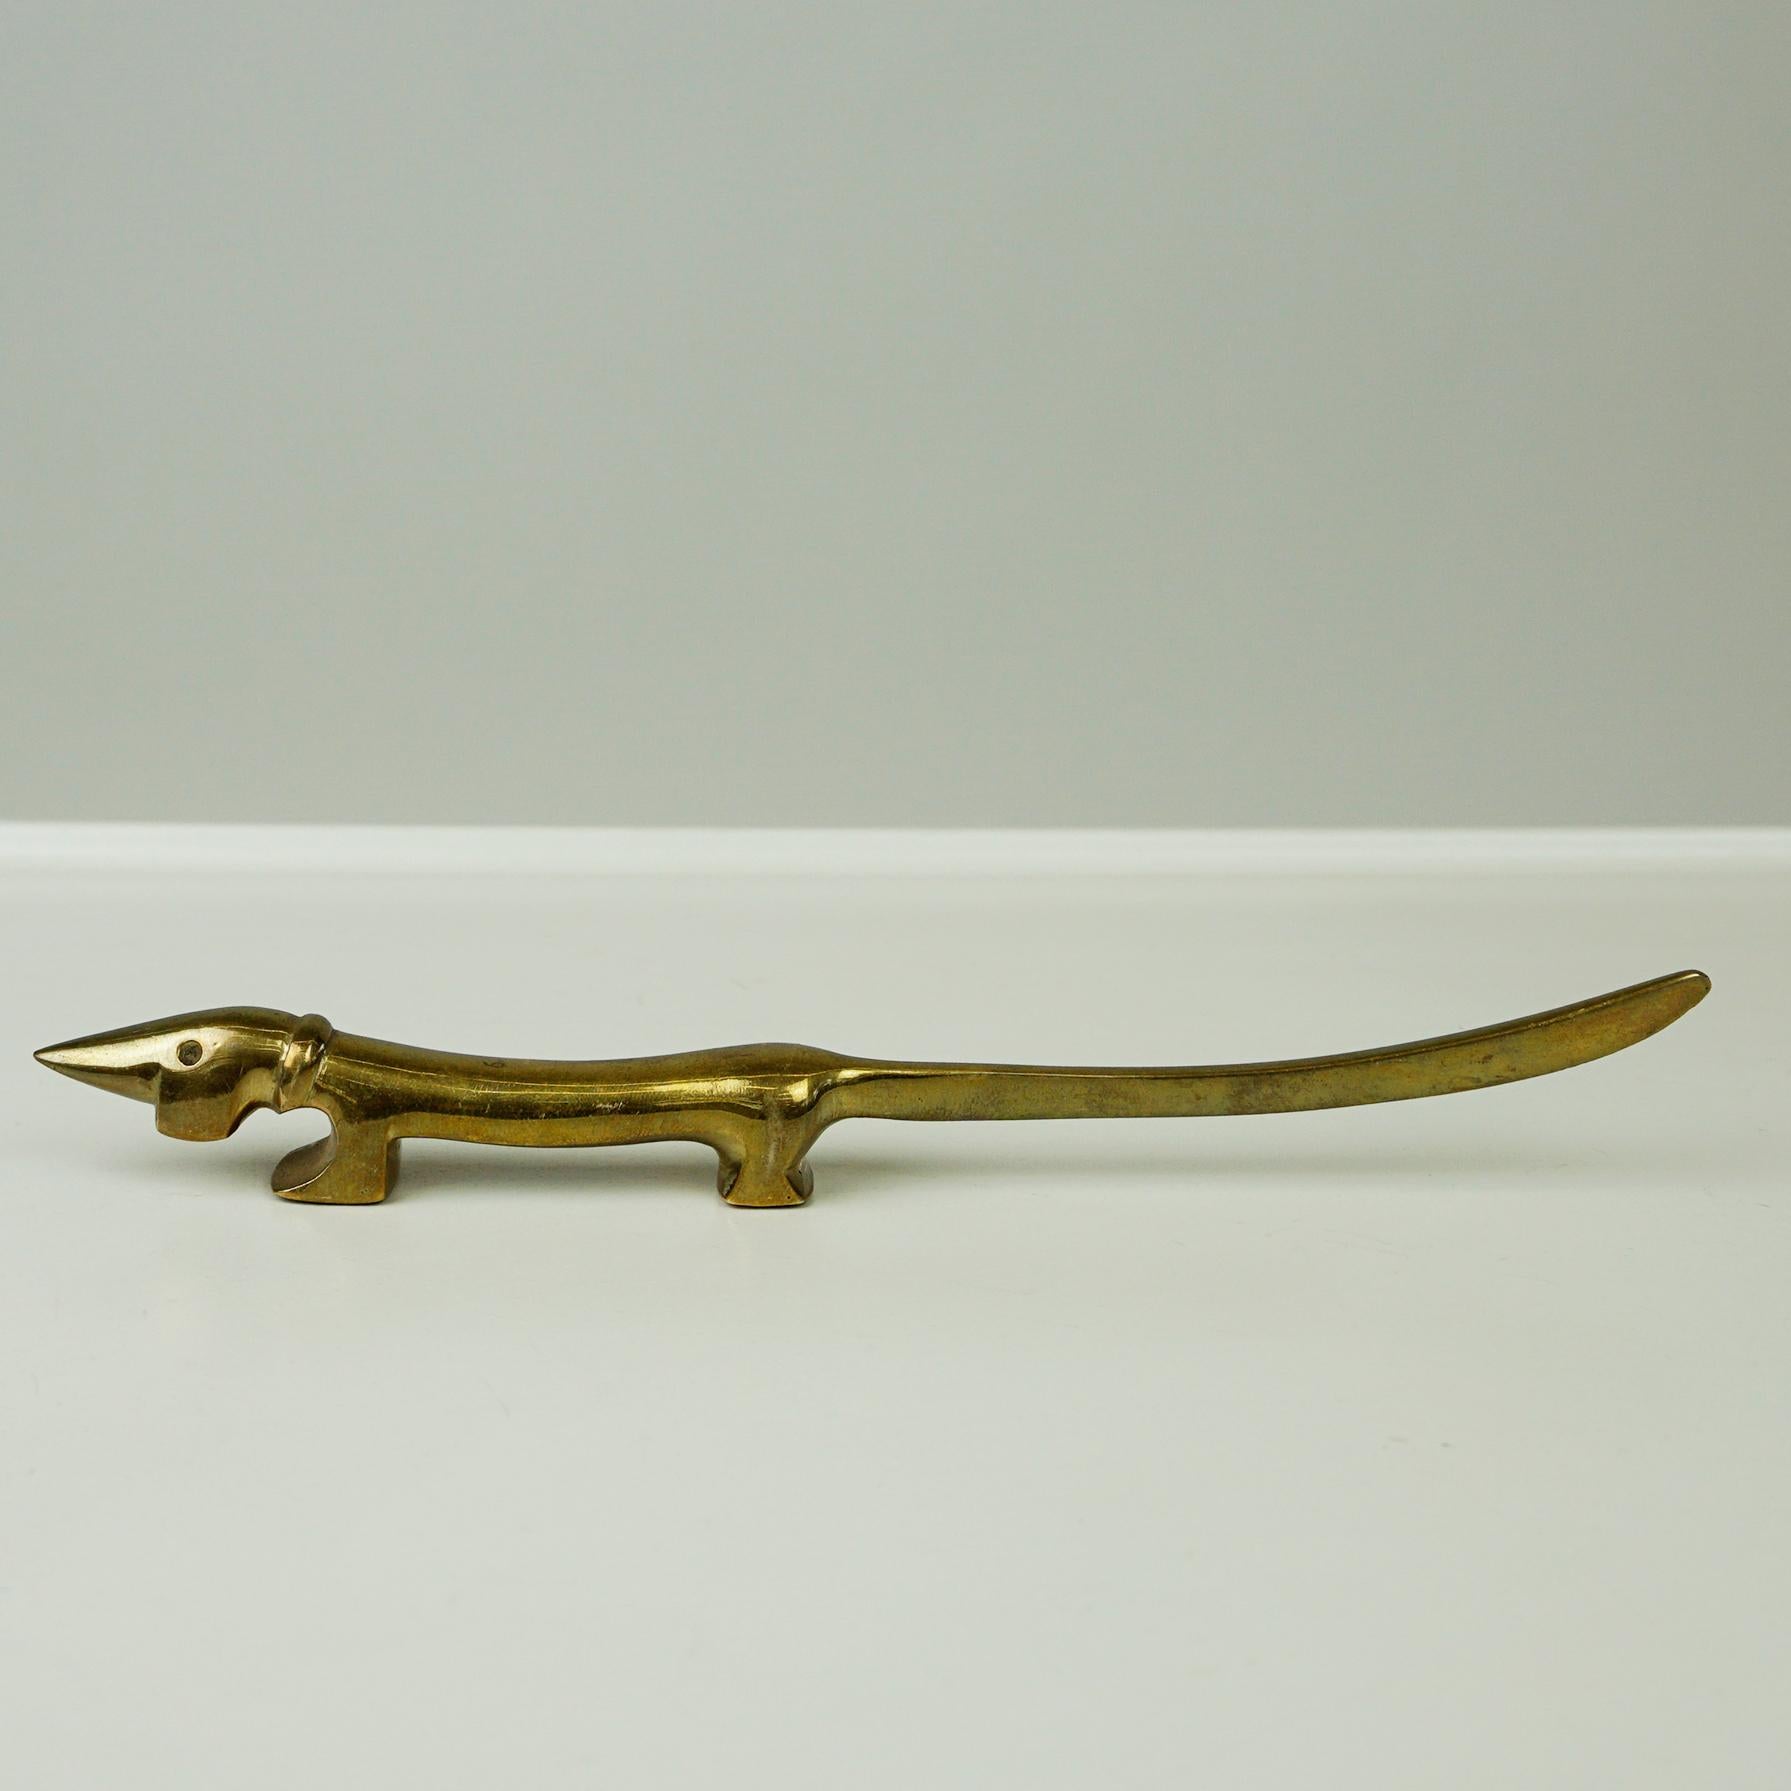 This charming Austrian Midcentury golden solid brass letter opener or paper knife has been designed by Walter Bosse and produced by Herta Baller in the 1950s. The dog features a long tail which is the knife.
A very amazing Highlight for your Desk